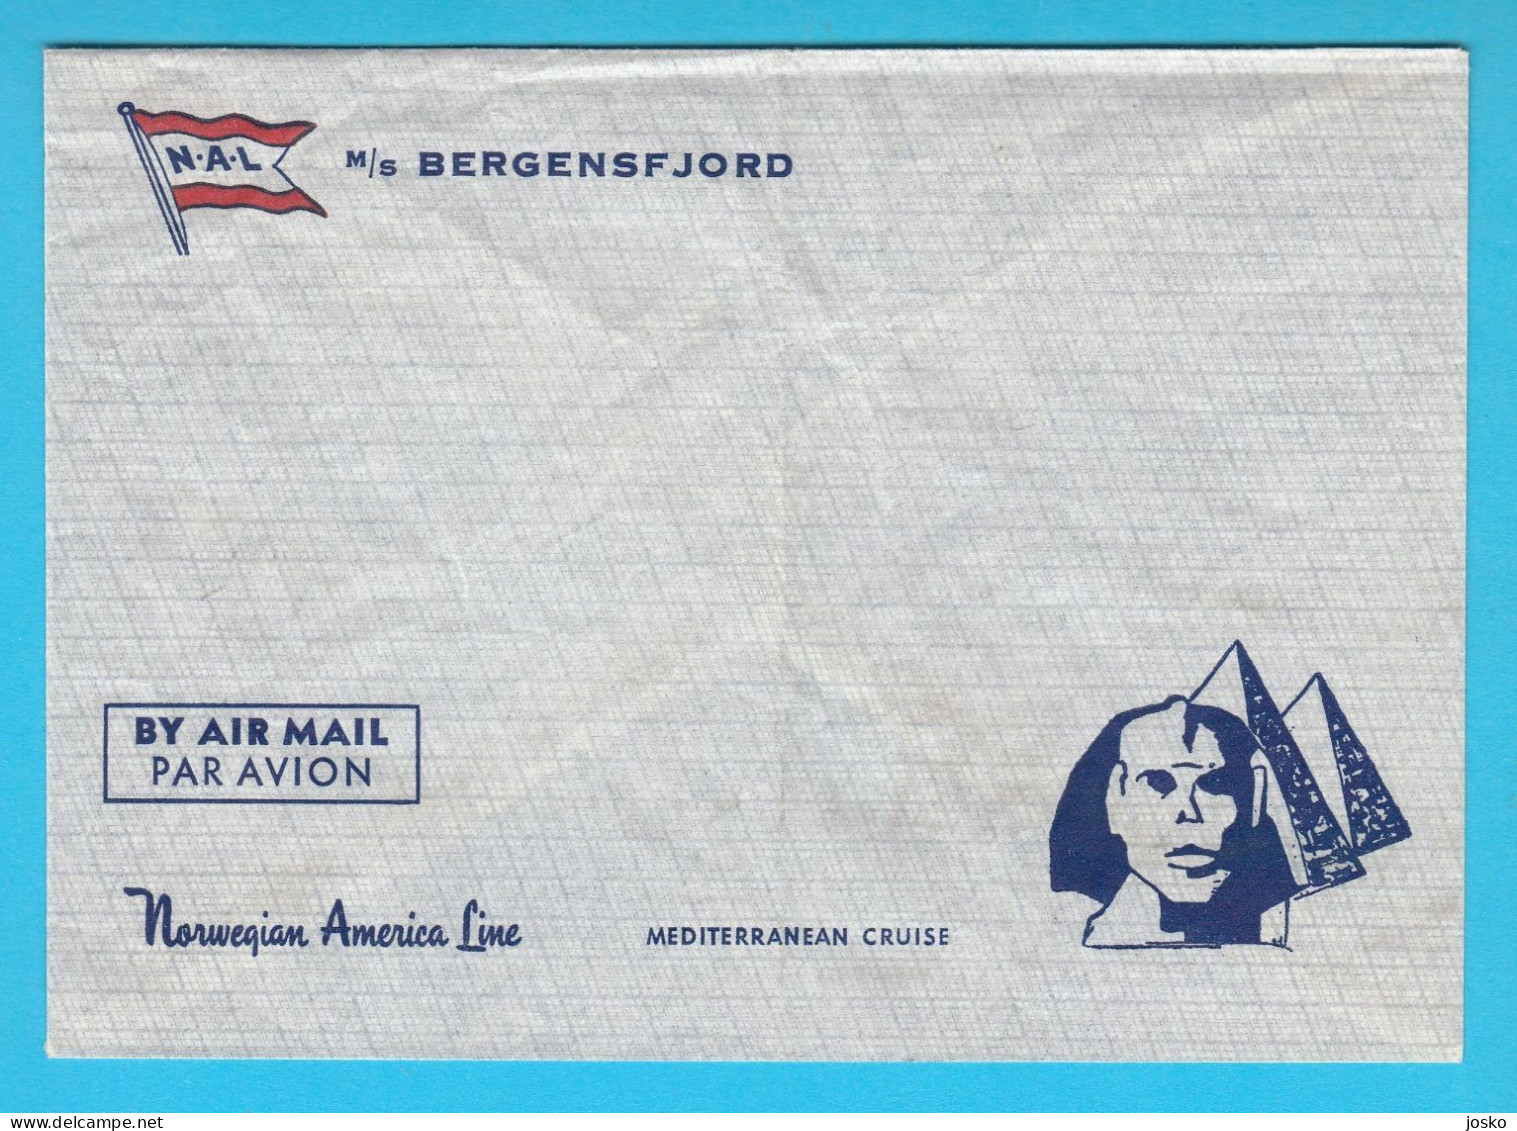 NORWEGIAN AMERICA LINE (Den Norske Amerikalinje) Ship M/S BERGENSFJORD * By Air Mail * Vintage Official Cover * Norway - Lettres & Documents